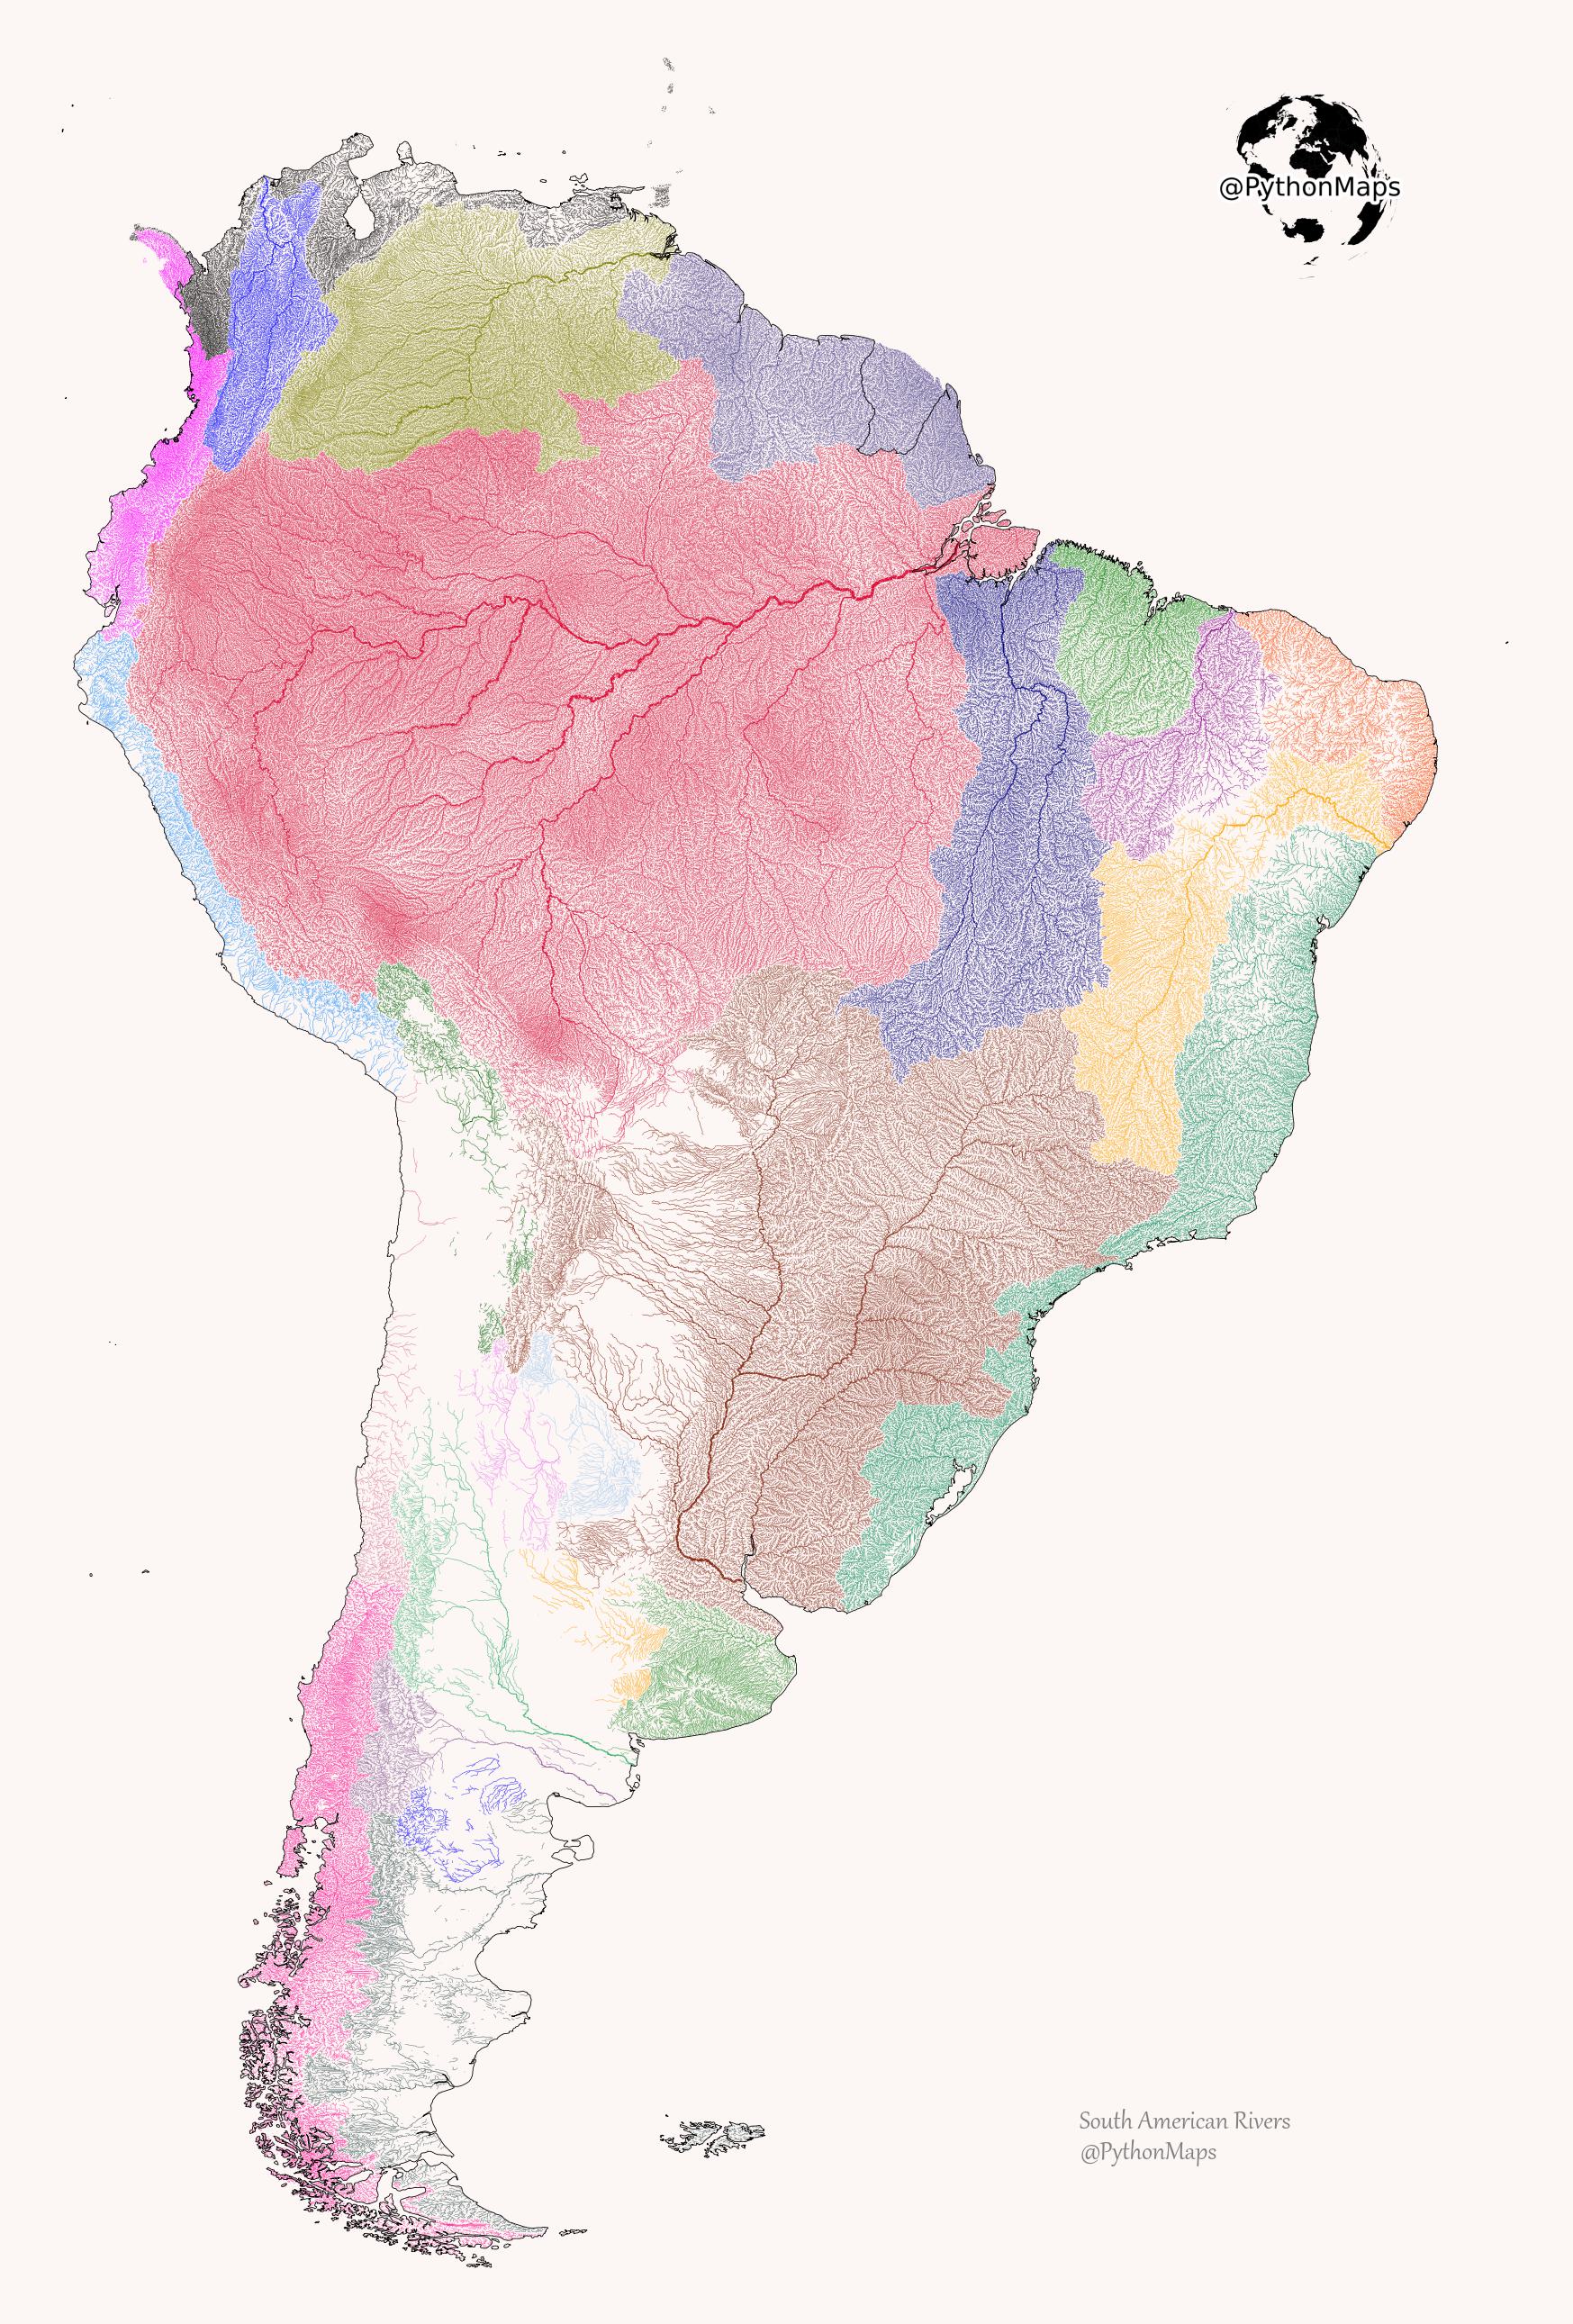 South American Rivers